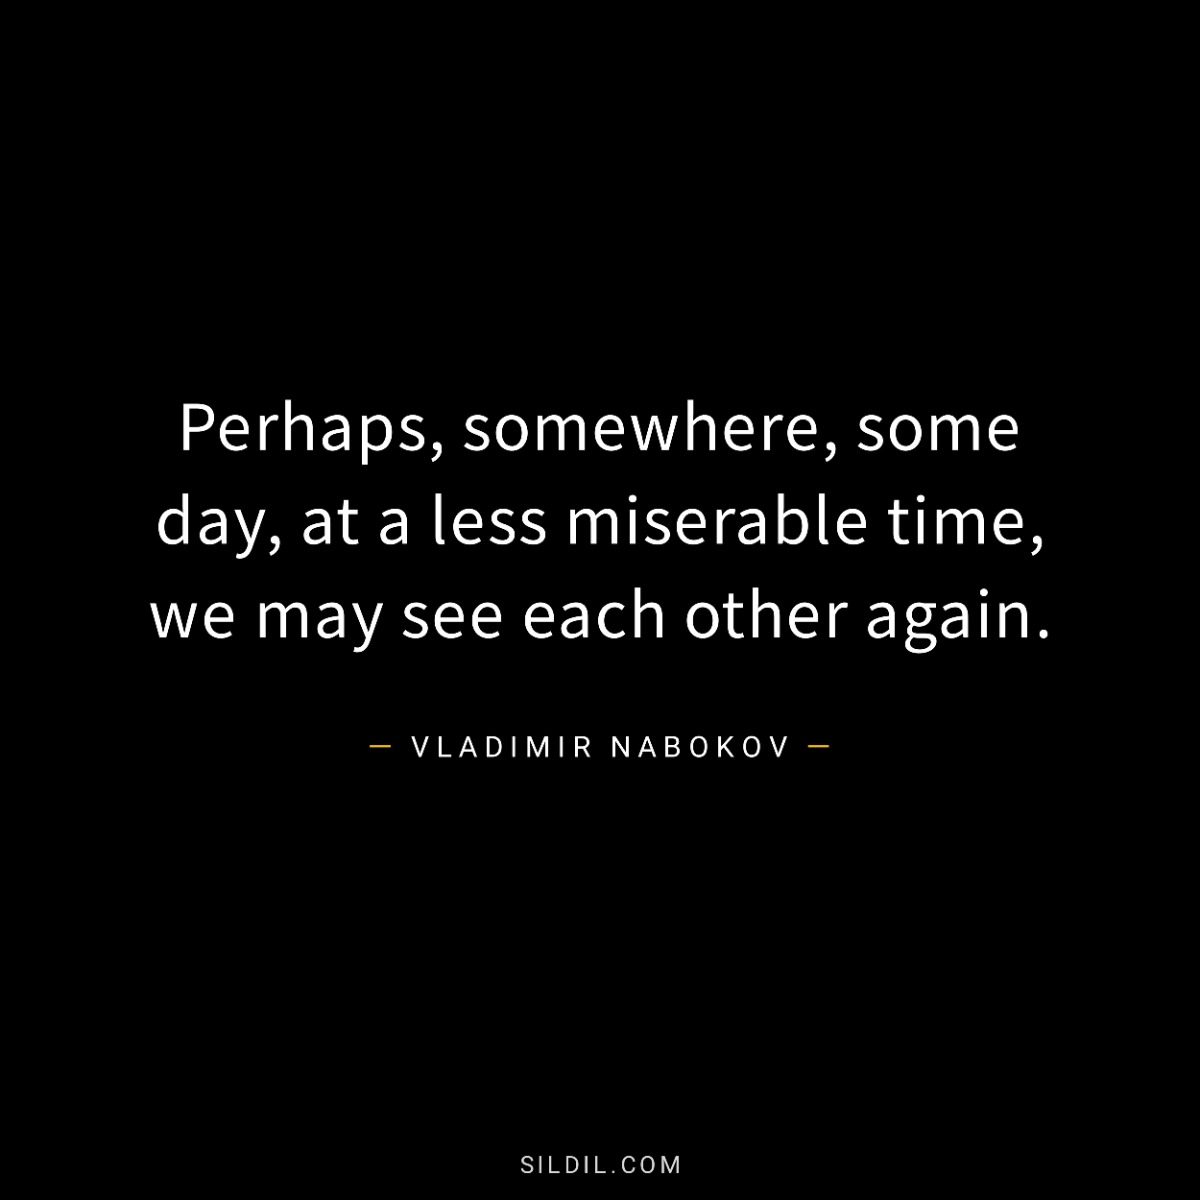 Perhaps, somewhere, some day, at a less miserable time, we may see each other again.